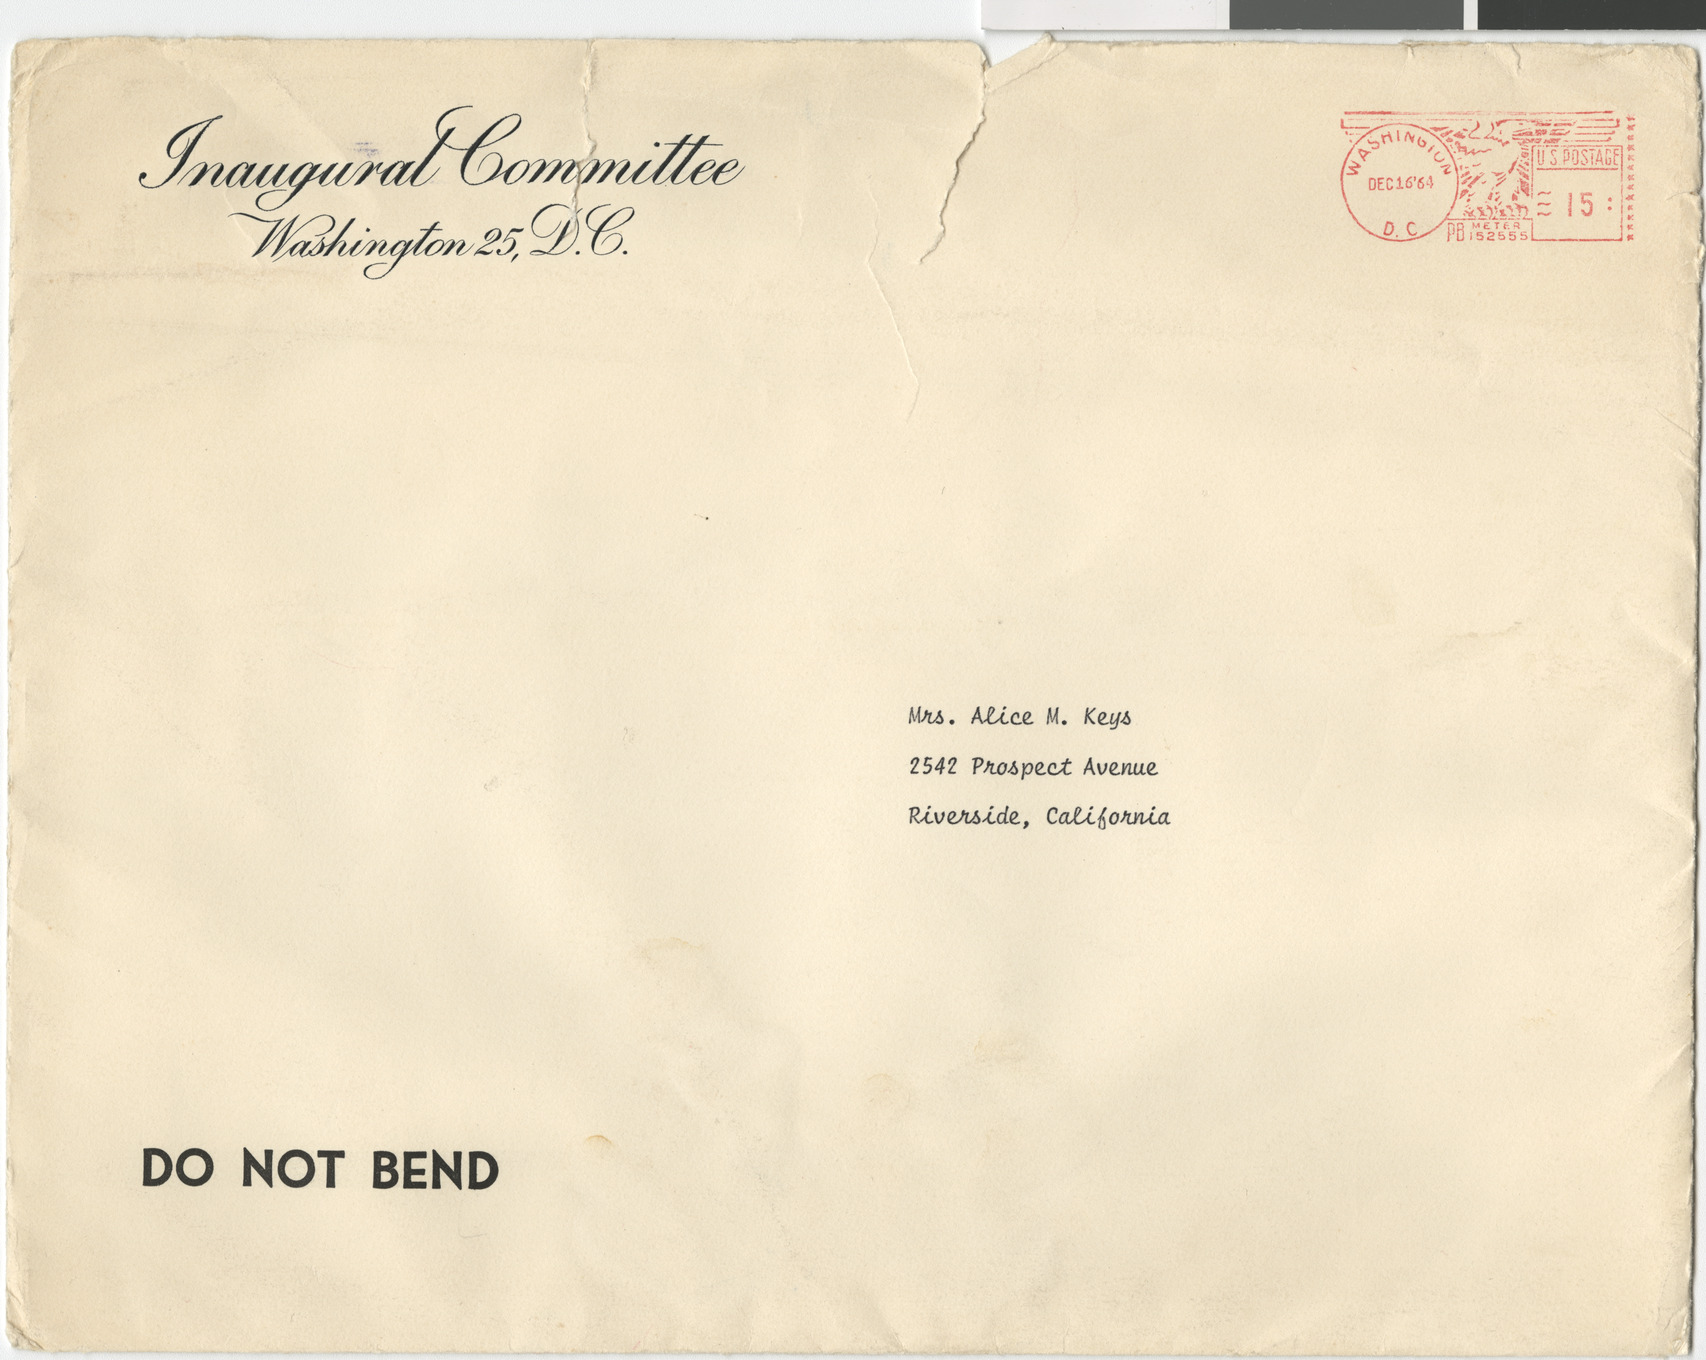 Invitation to the Presidential Inauguration and related material, 1965